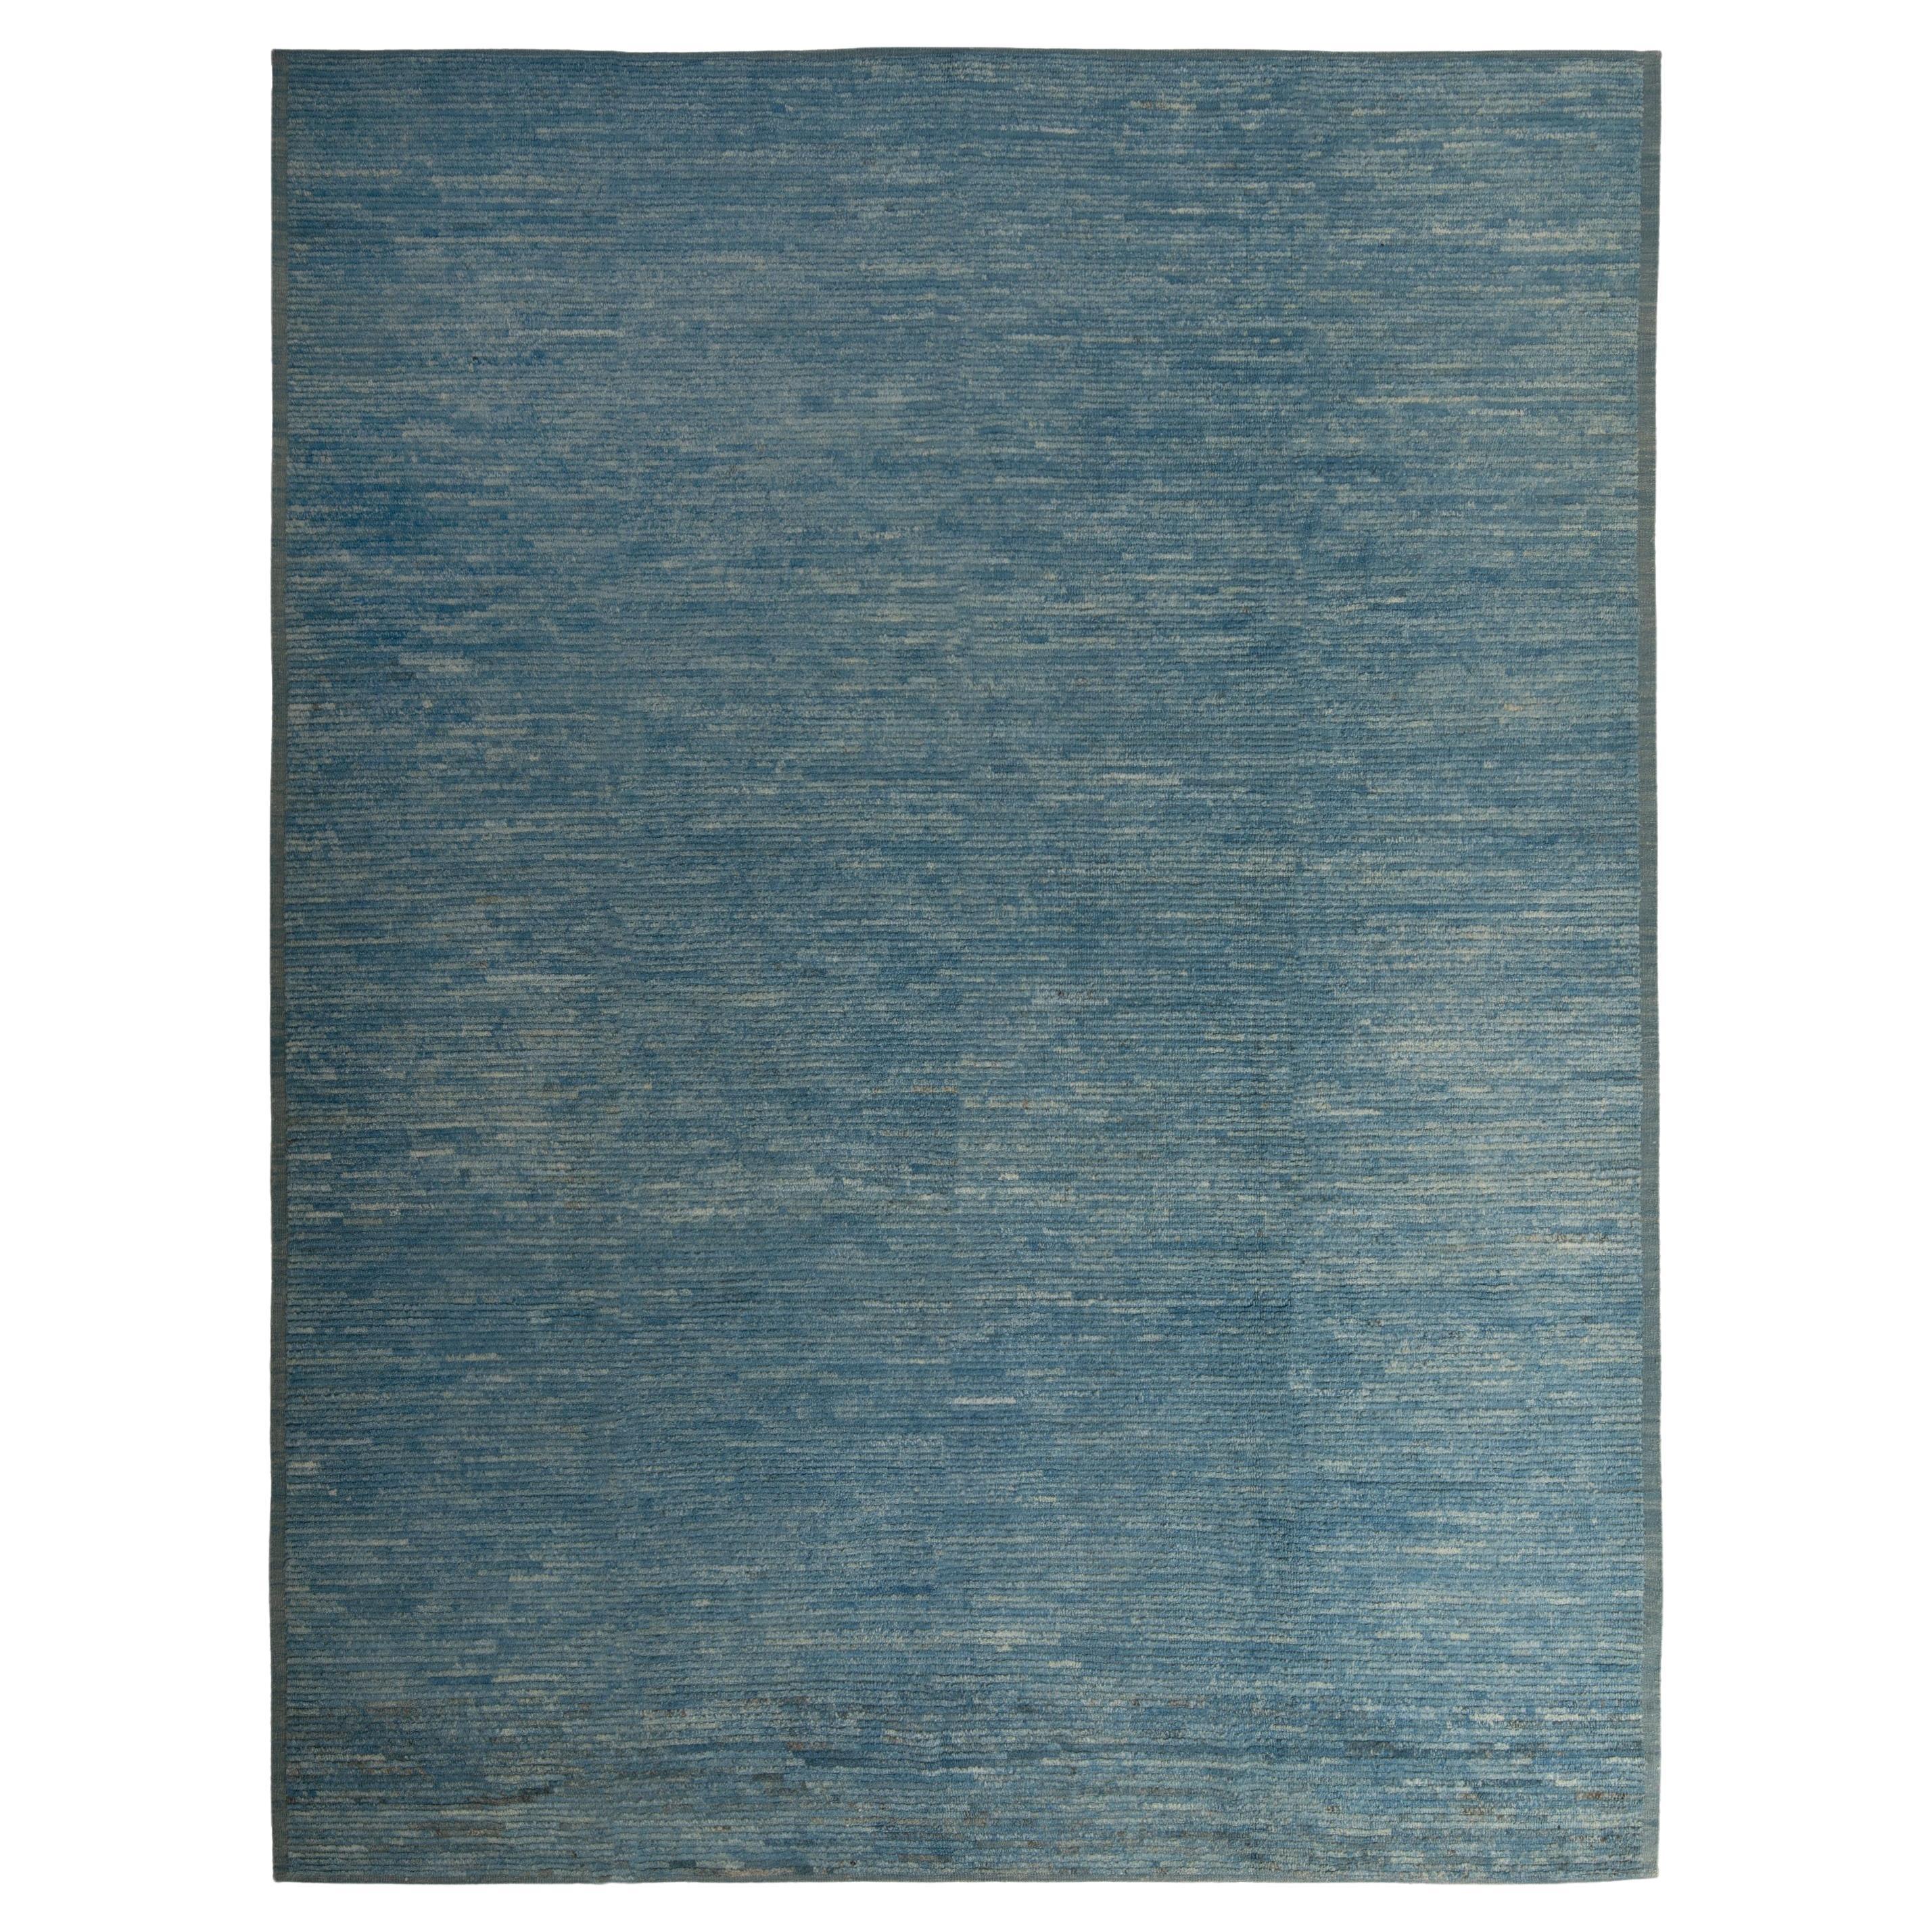 abc carpet Zameen Patterned Modern Wool Rug - 9'3" x 12' For Sale